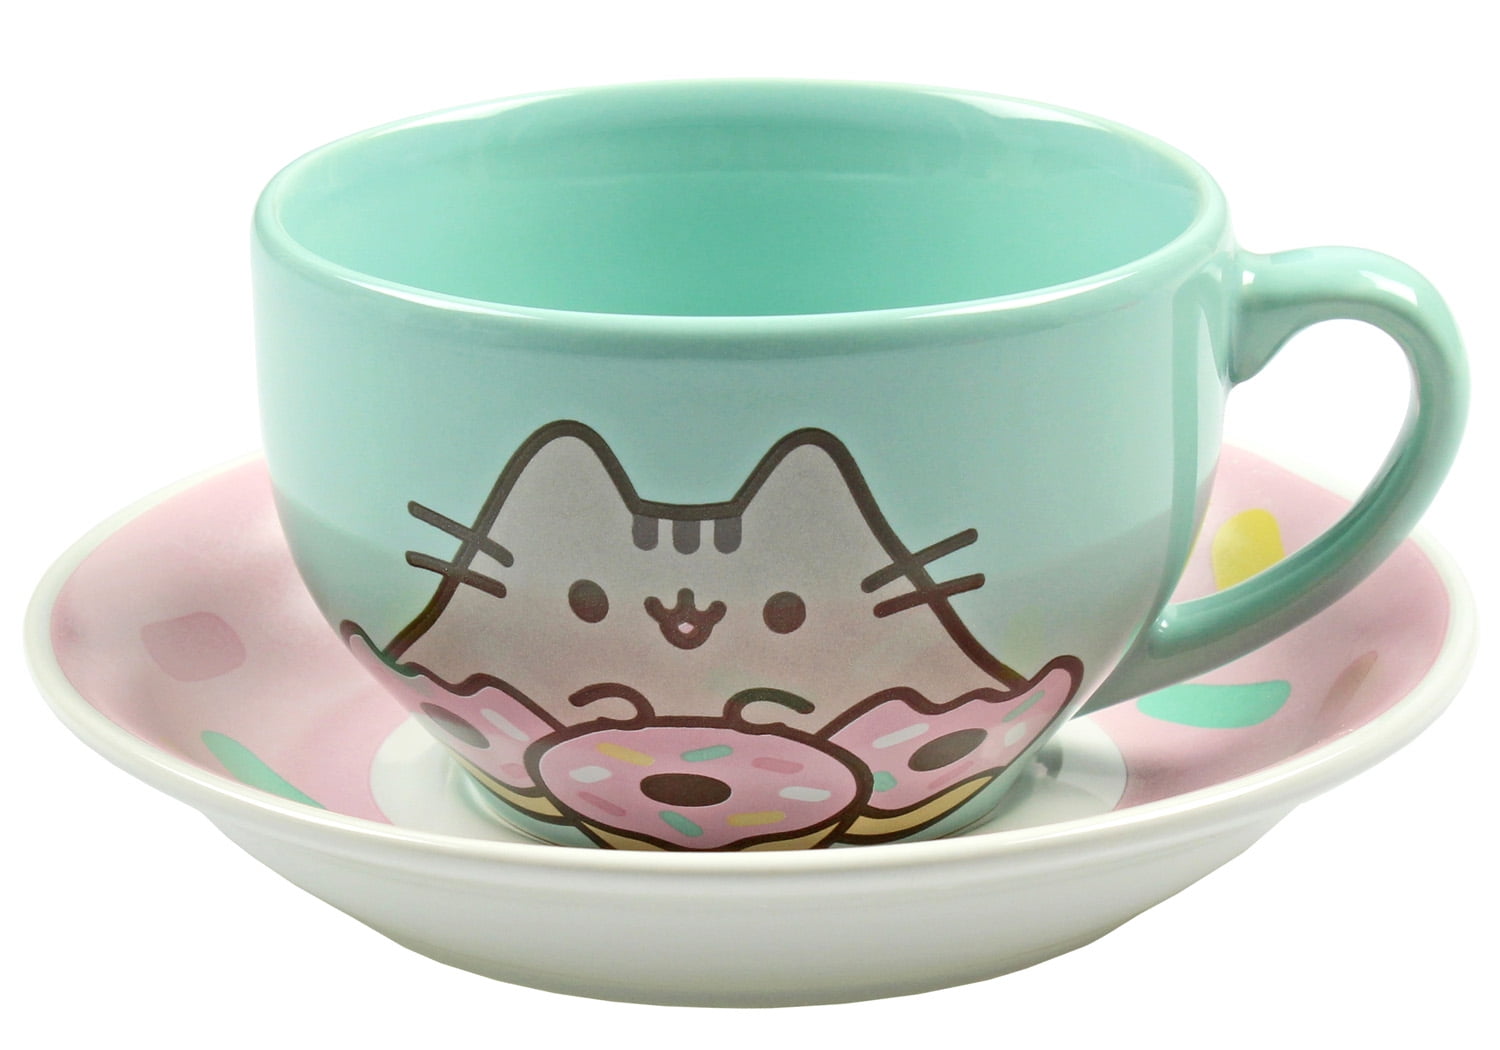 Pusheen Cat Tea Cup and Saucer Apple Pie 6oz New Fast Free Shipping!